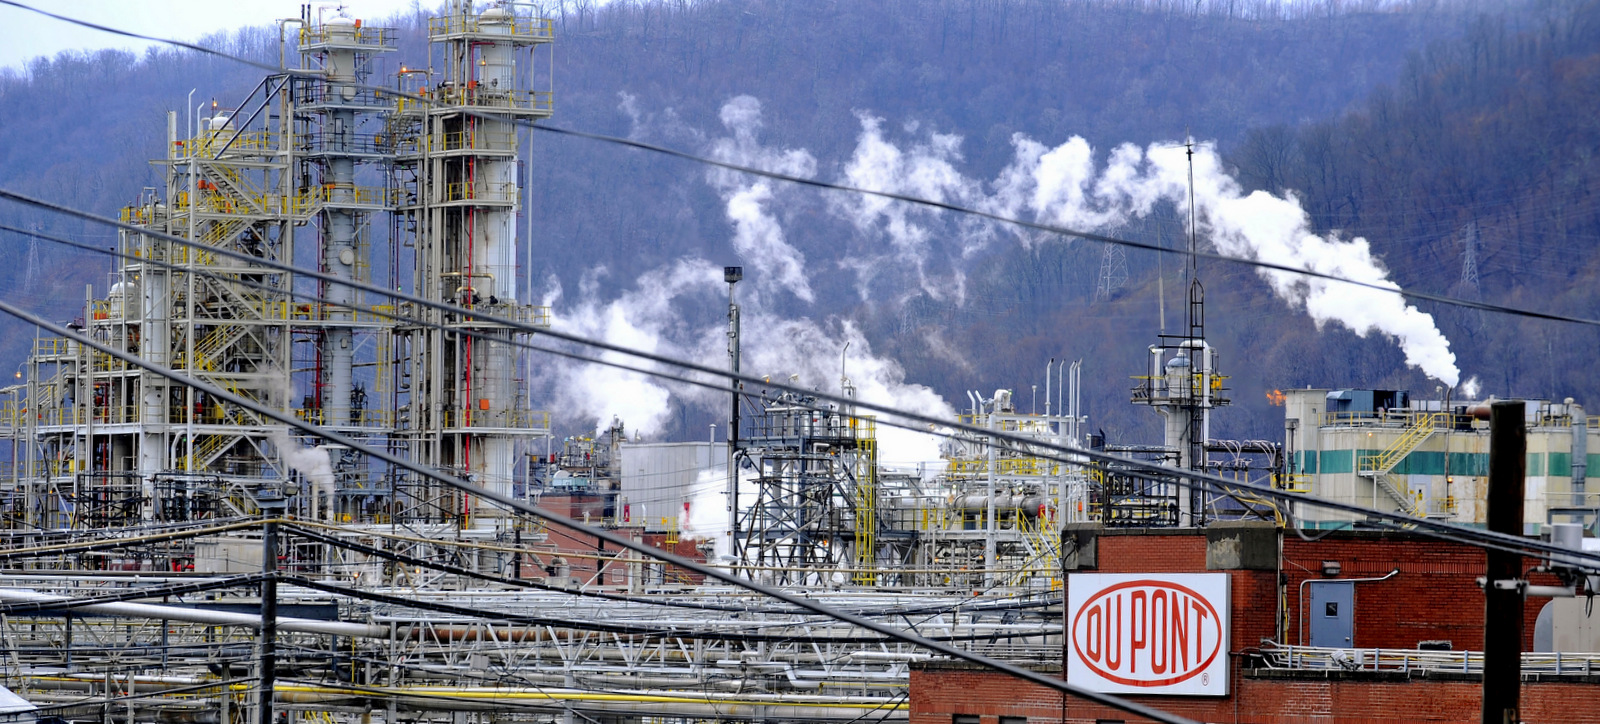 White smoke hovers over a DuPont chemical plant in Belle, W.Va. DuPont - a chemical company with a long history of endangering public health - is being sued by 13 people in Louisiana over emissions from one of its plants. (AP/Jeff Gentner)